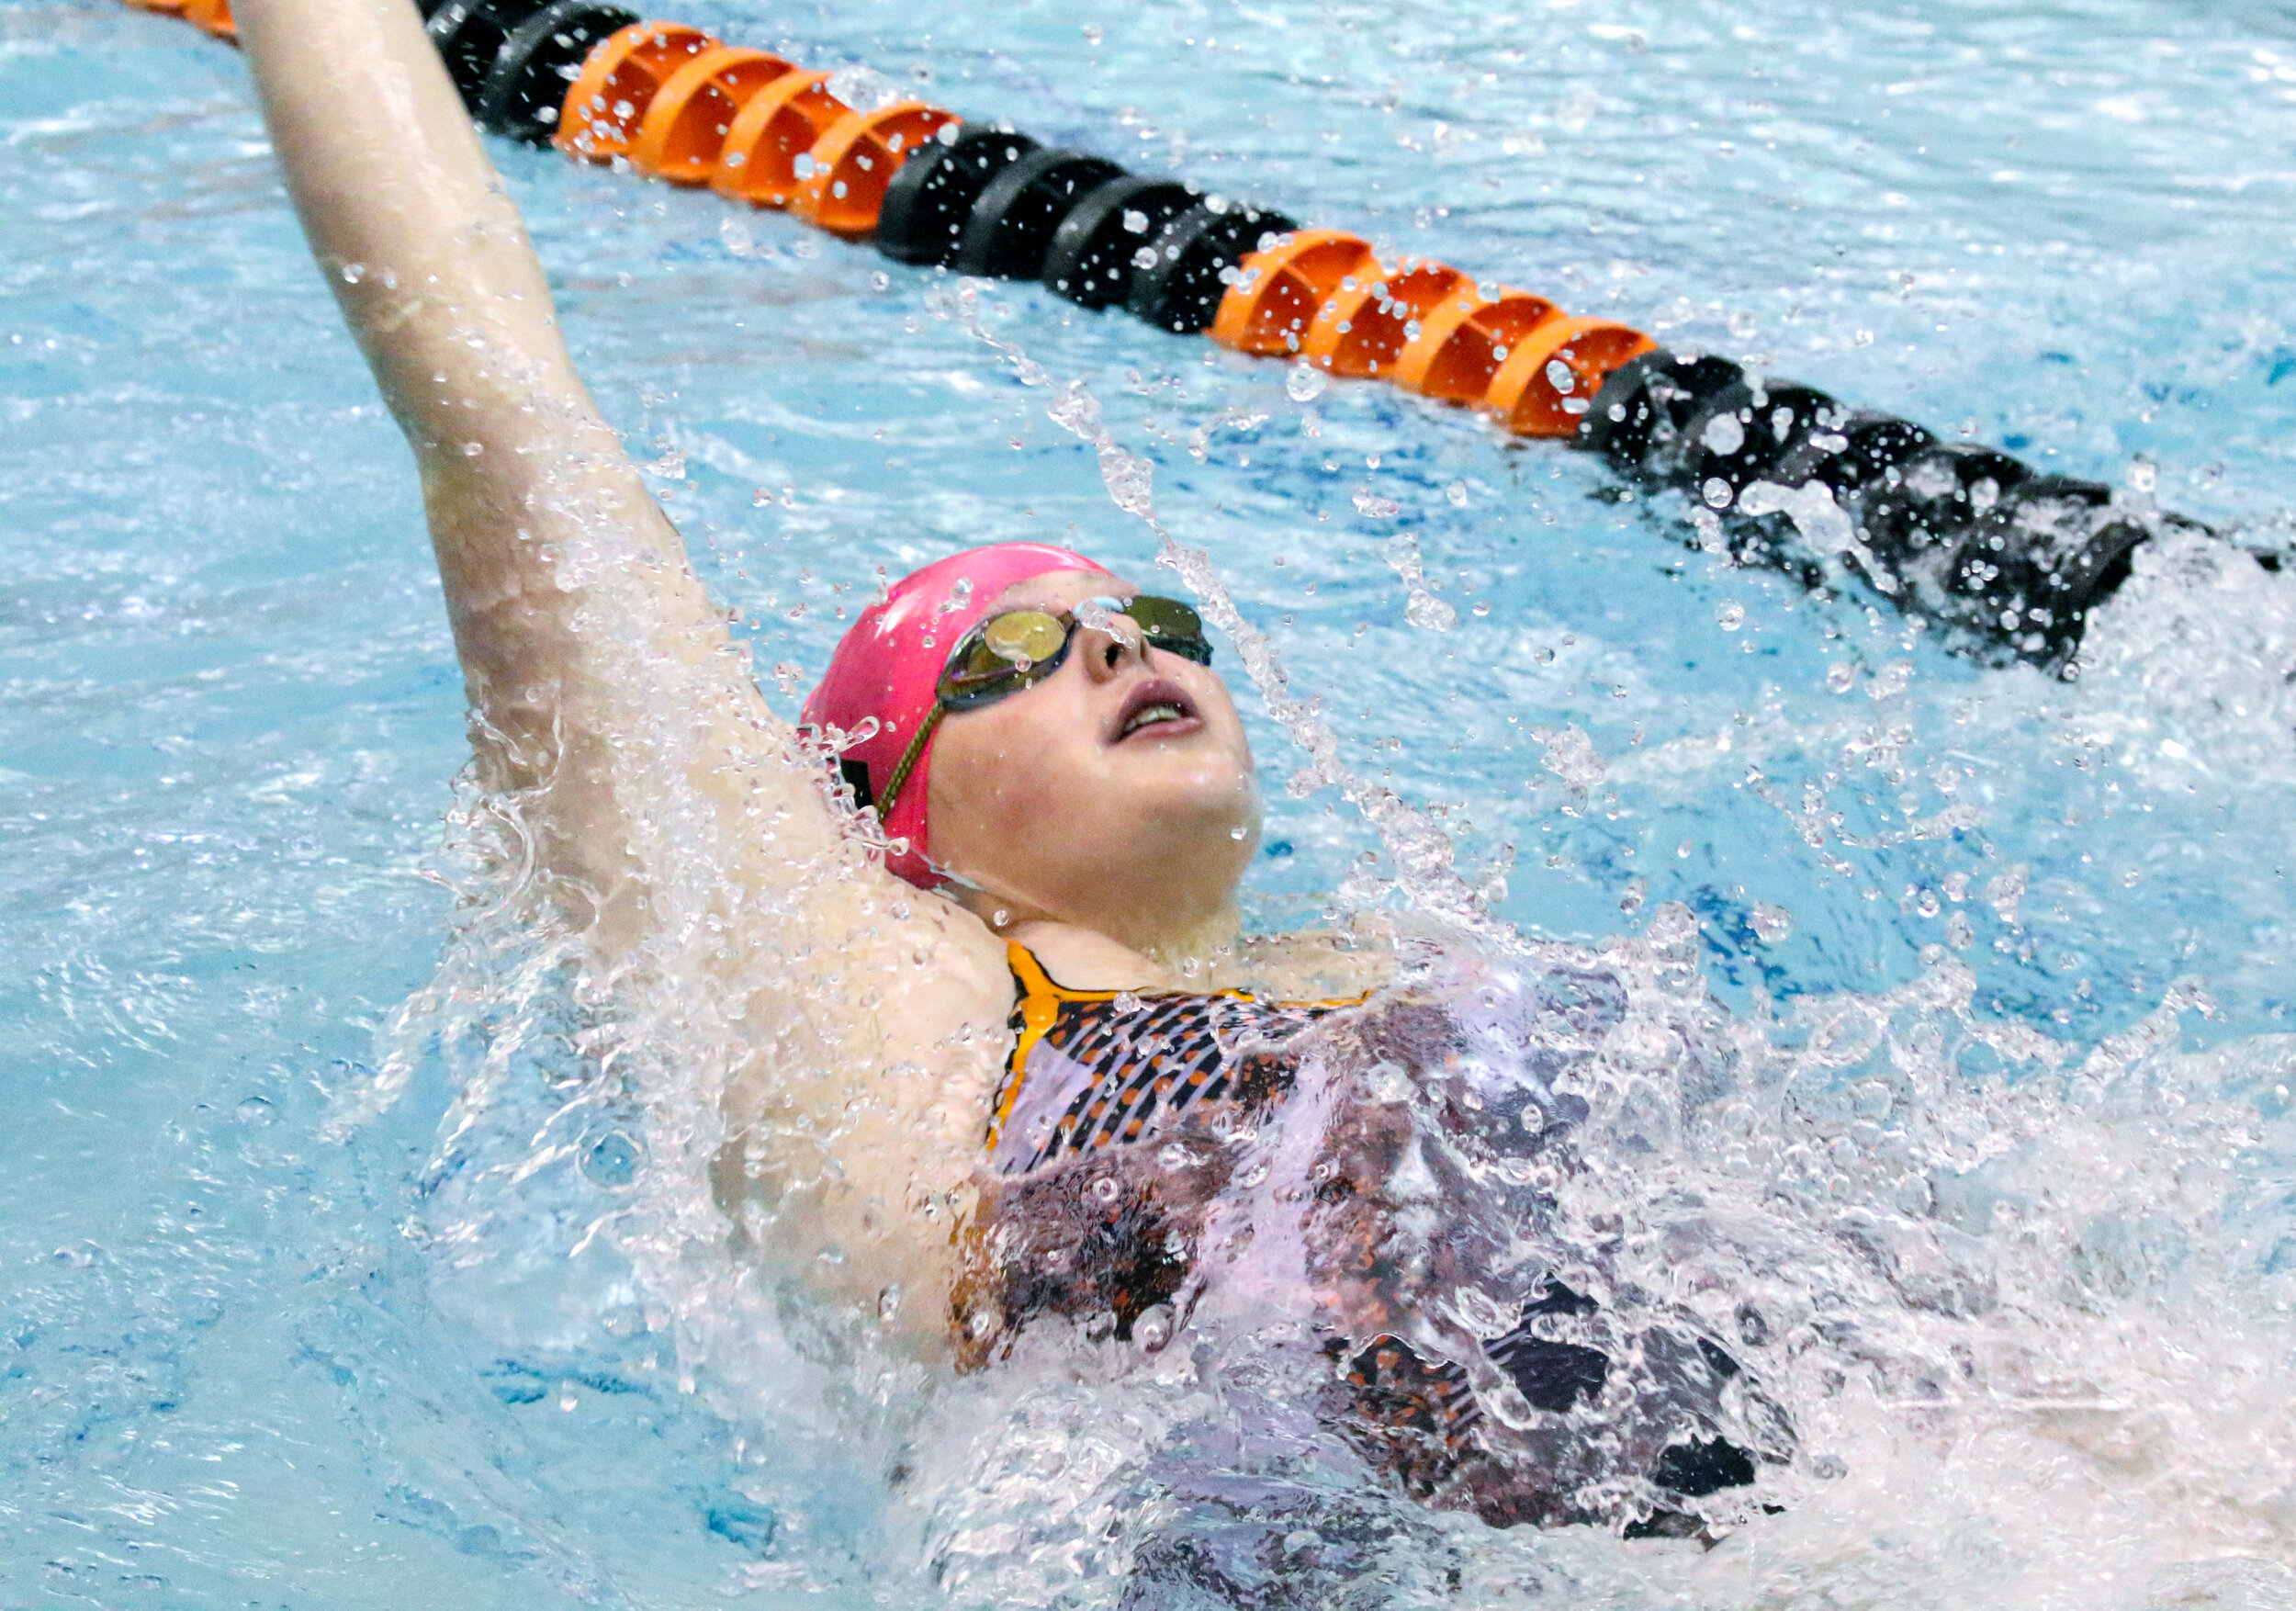  Wellsville’s Stephanie Oswald competes during the 200 medley relay event in Saturday morning’s Senior Day meet against Hornell, in Wellsville. [Chris Brooks/WellsvilleSports.com] 